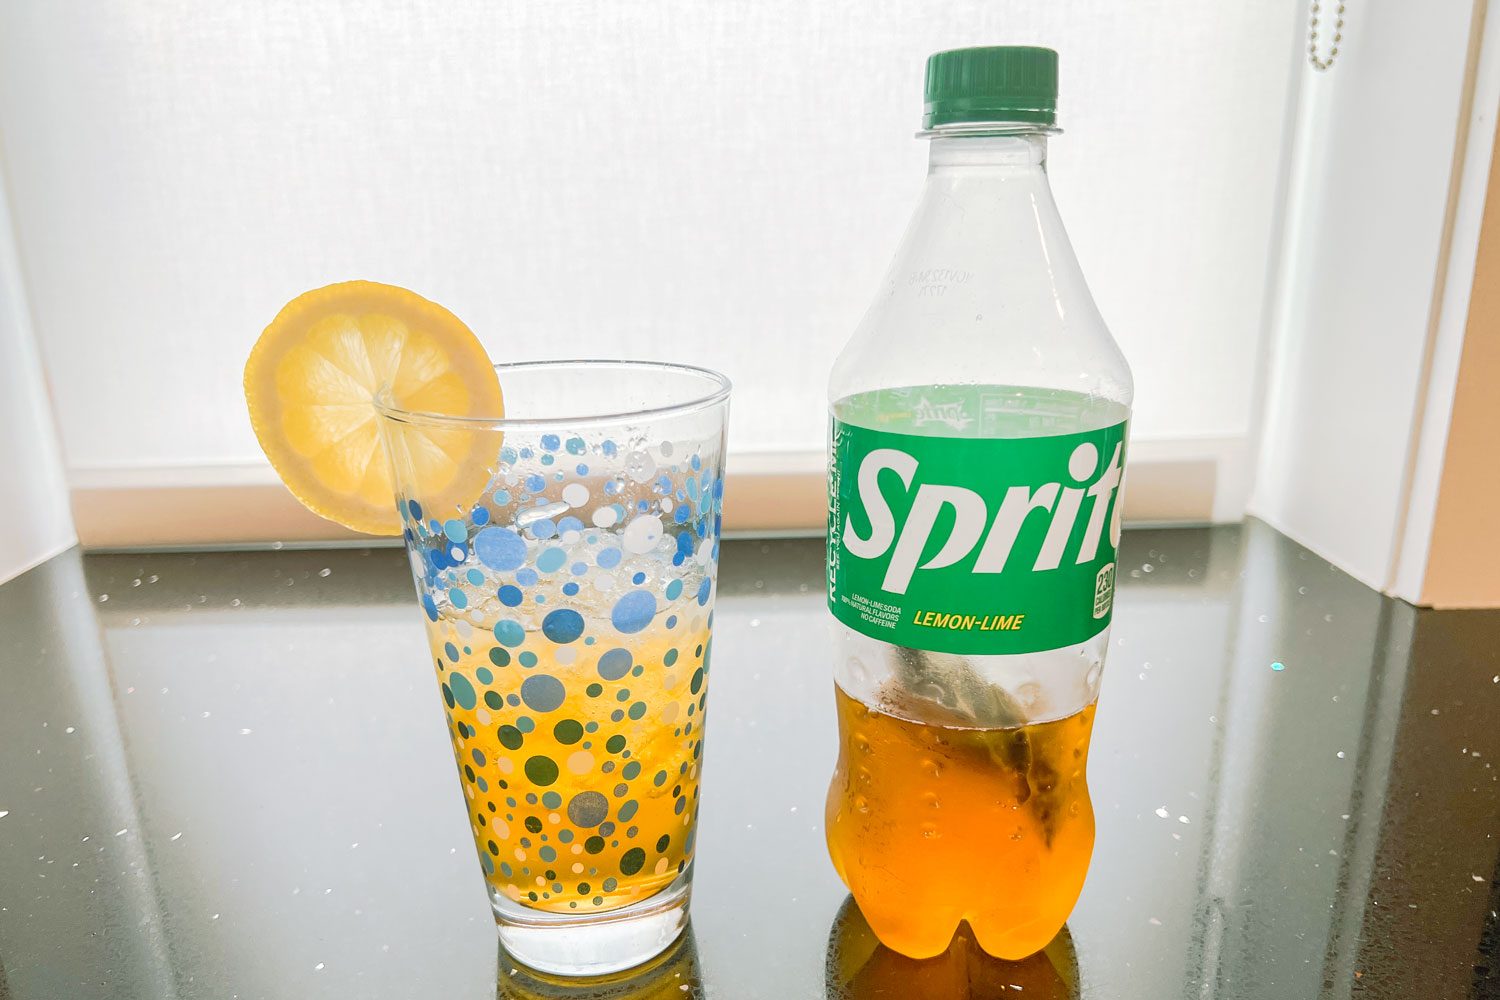 How to Make 'Sprite Iced Tea' with Just Sprite and 2 Lipton Tea Bags